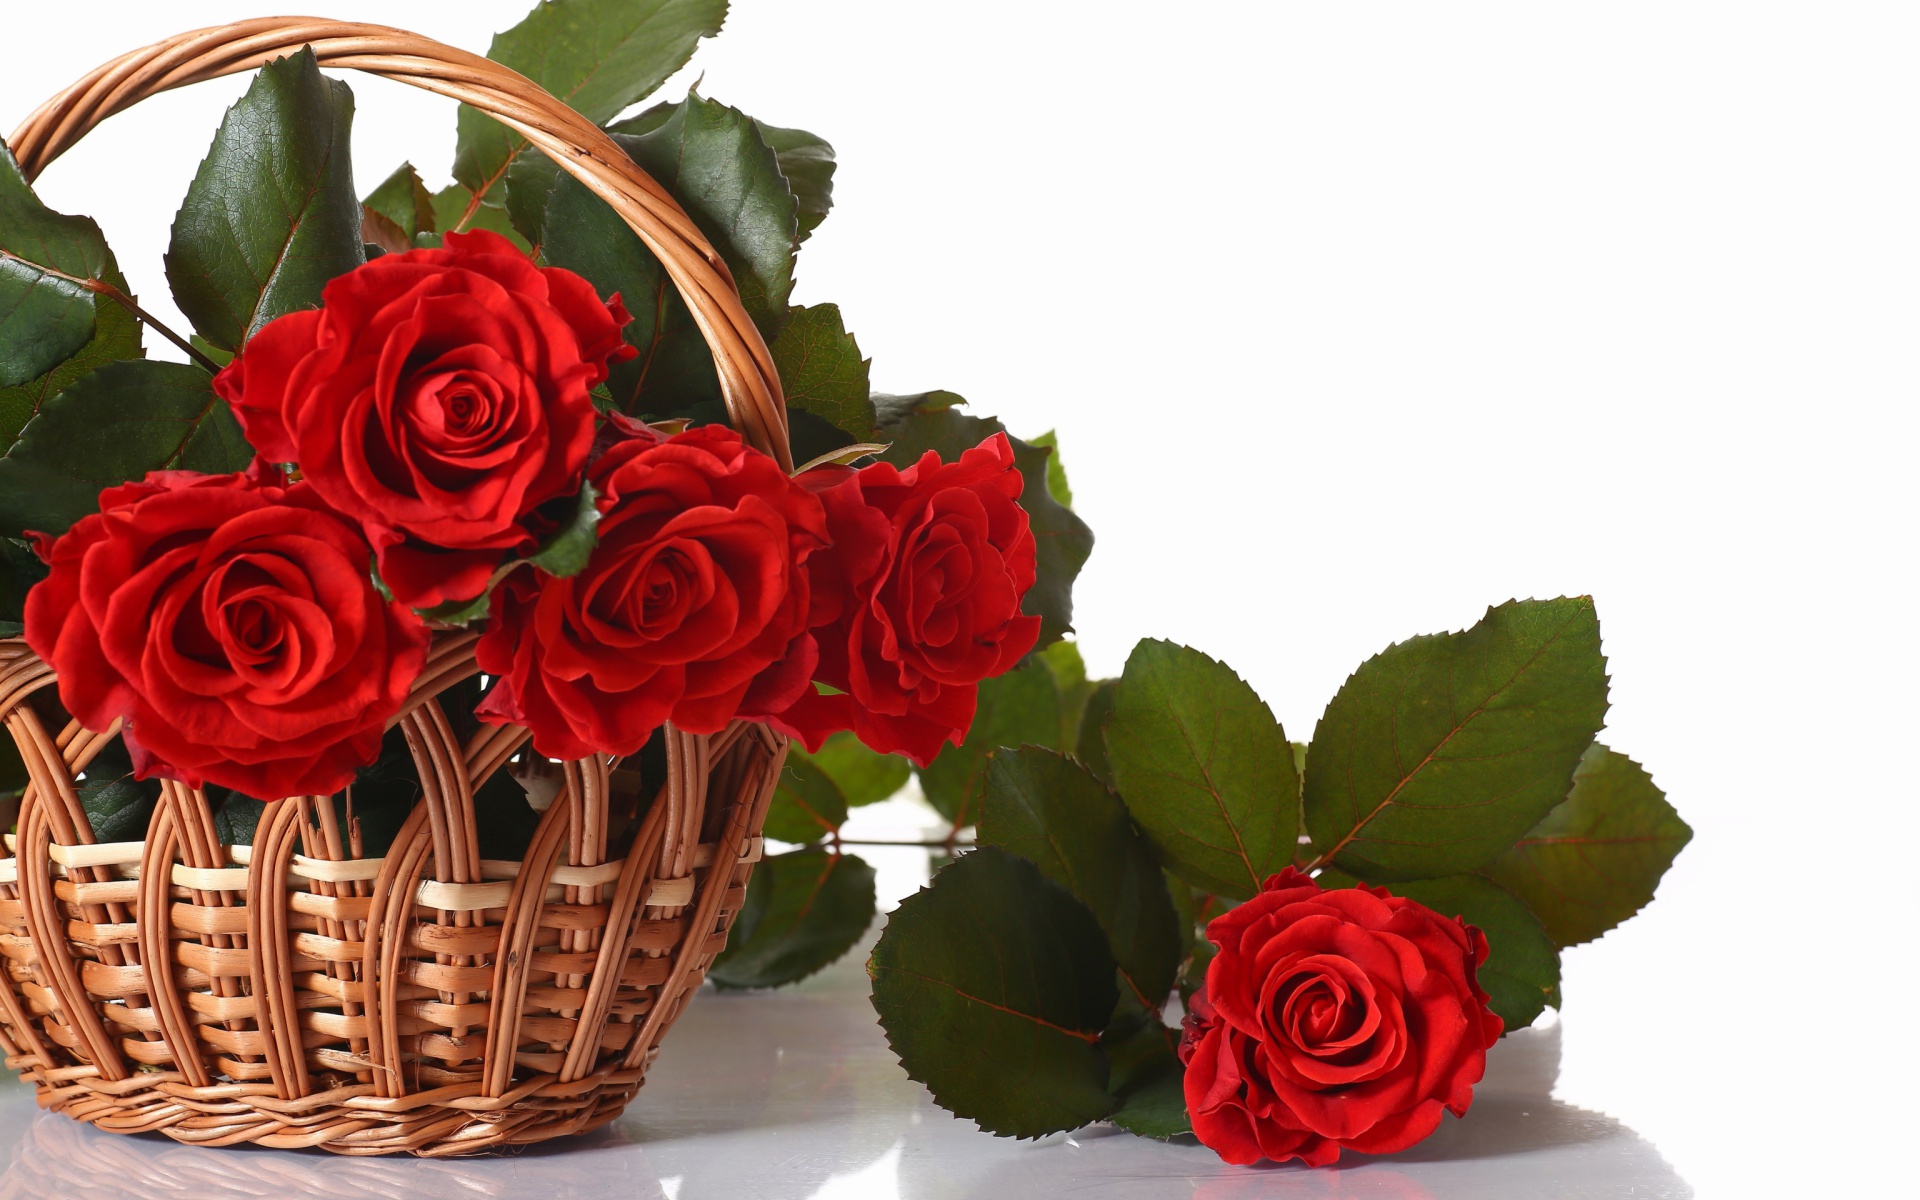 Basket with Roses Wallpaper for Widescreen Desktop PC 1920x1080 Full HD